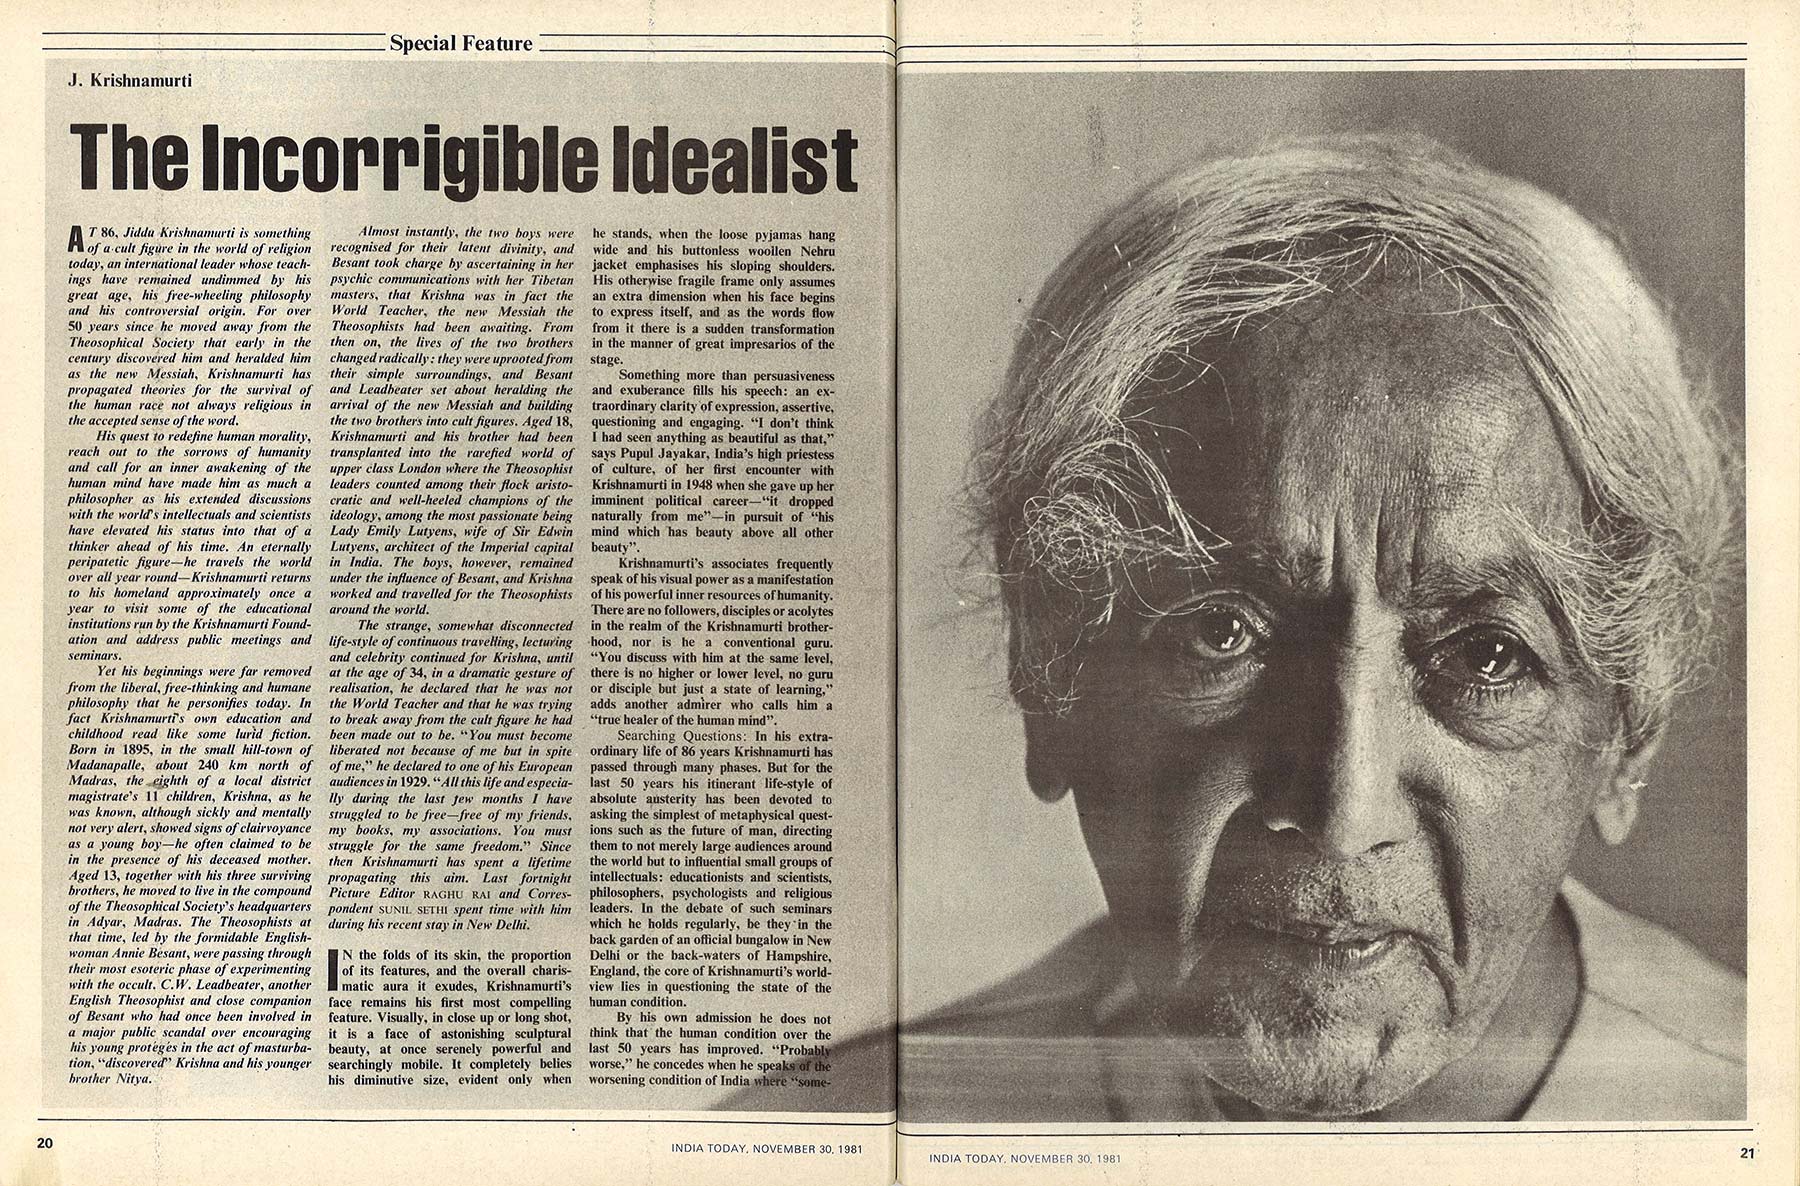 1981 India Today - The Incorrigible Idealist